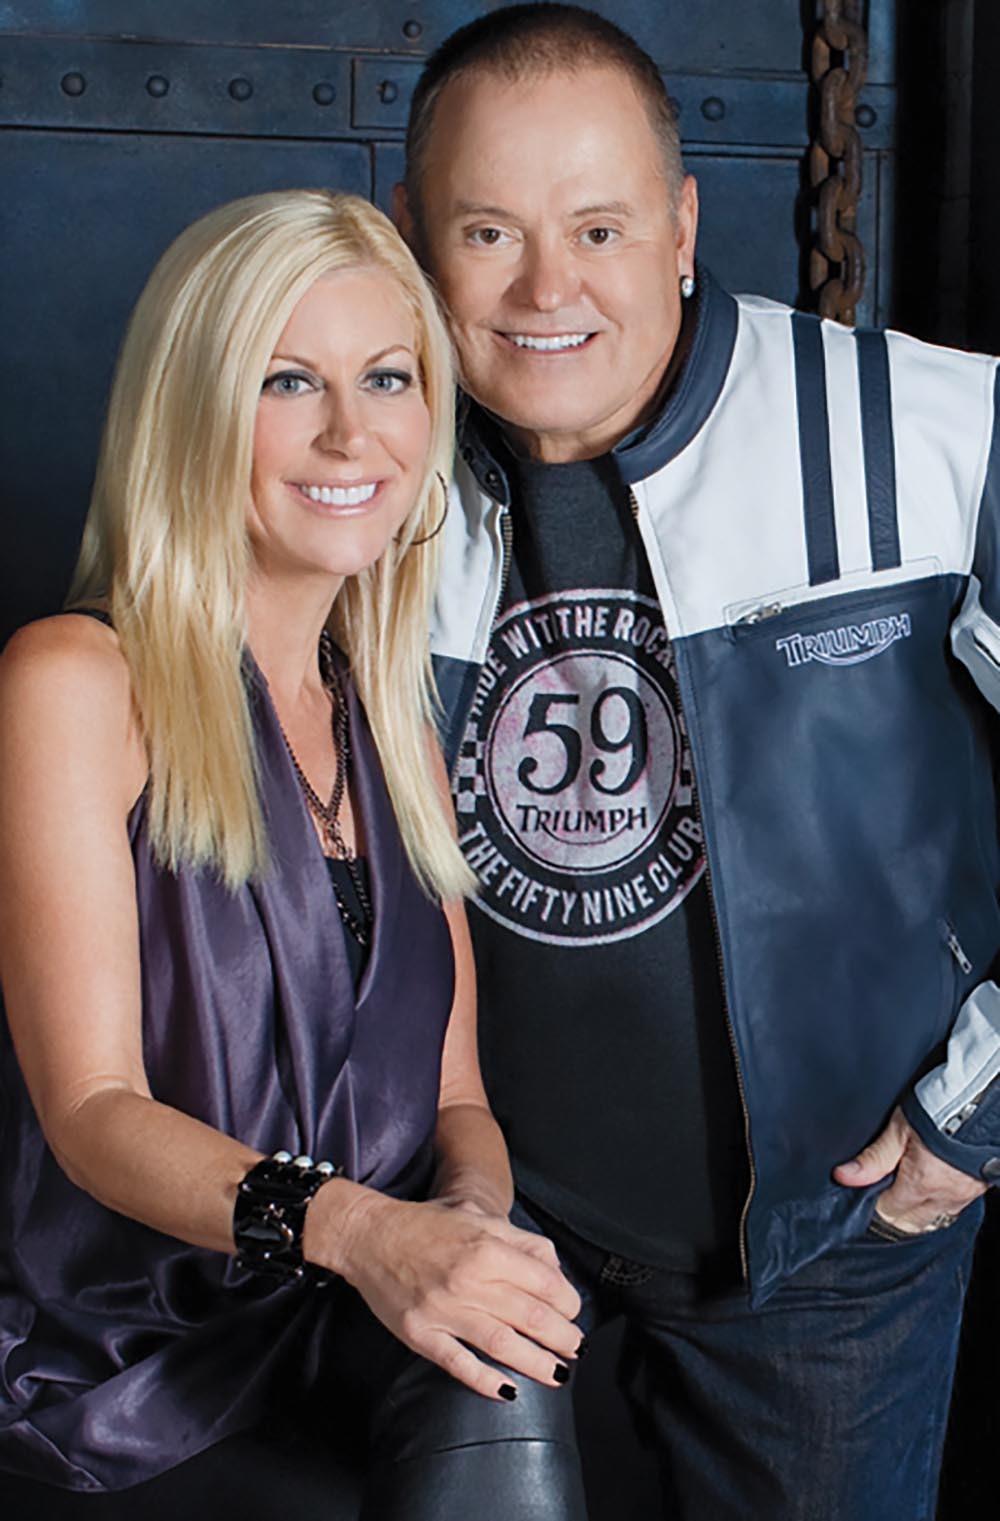 Bob and his wife, Renee, founded The Bob & Renee Parsons Foundation, which has made significant donations to 100 charities and organizations worldwide since 2012.